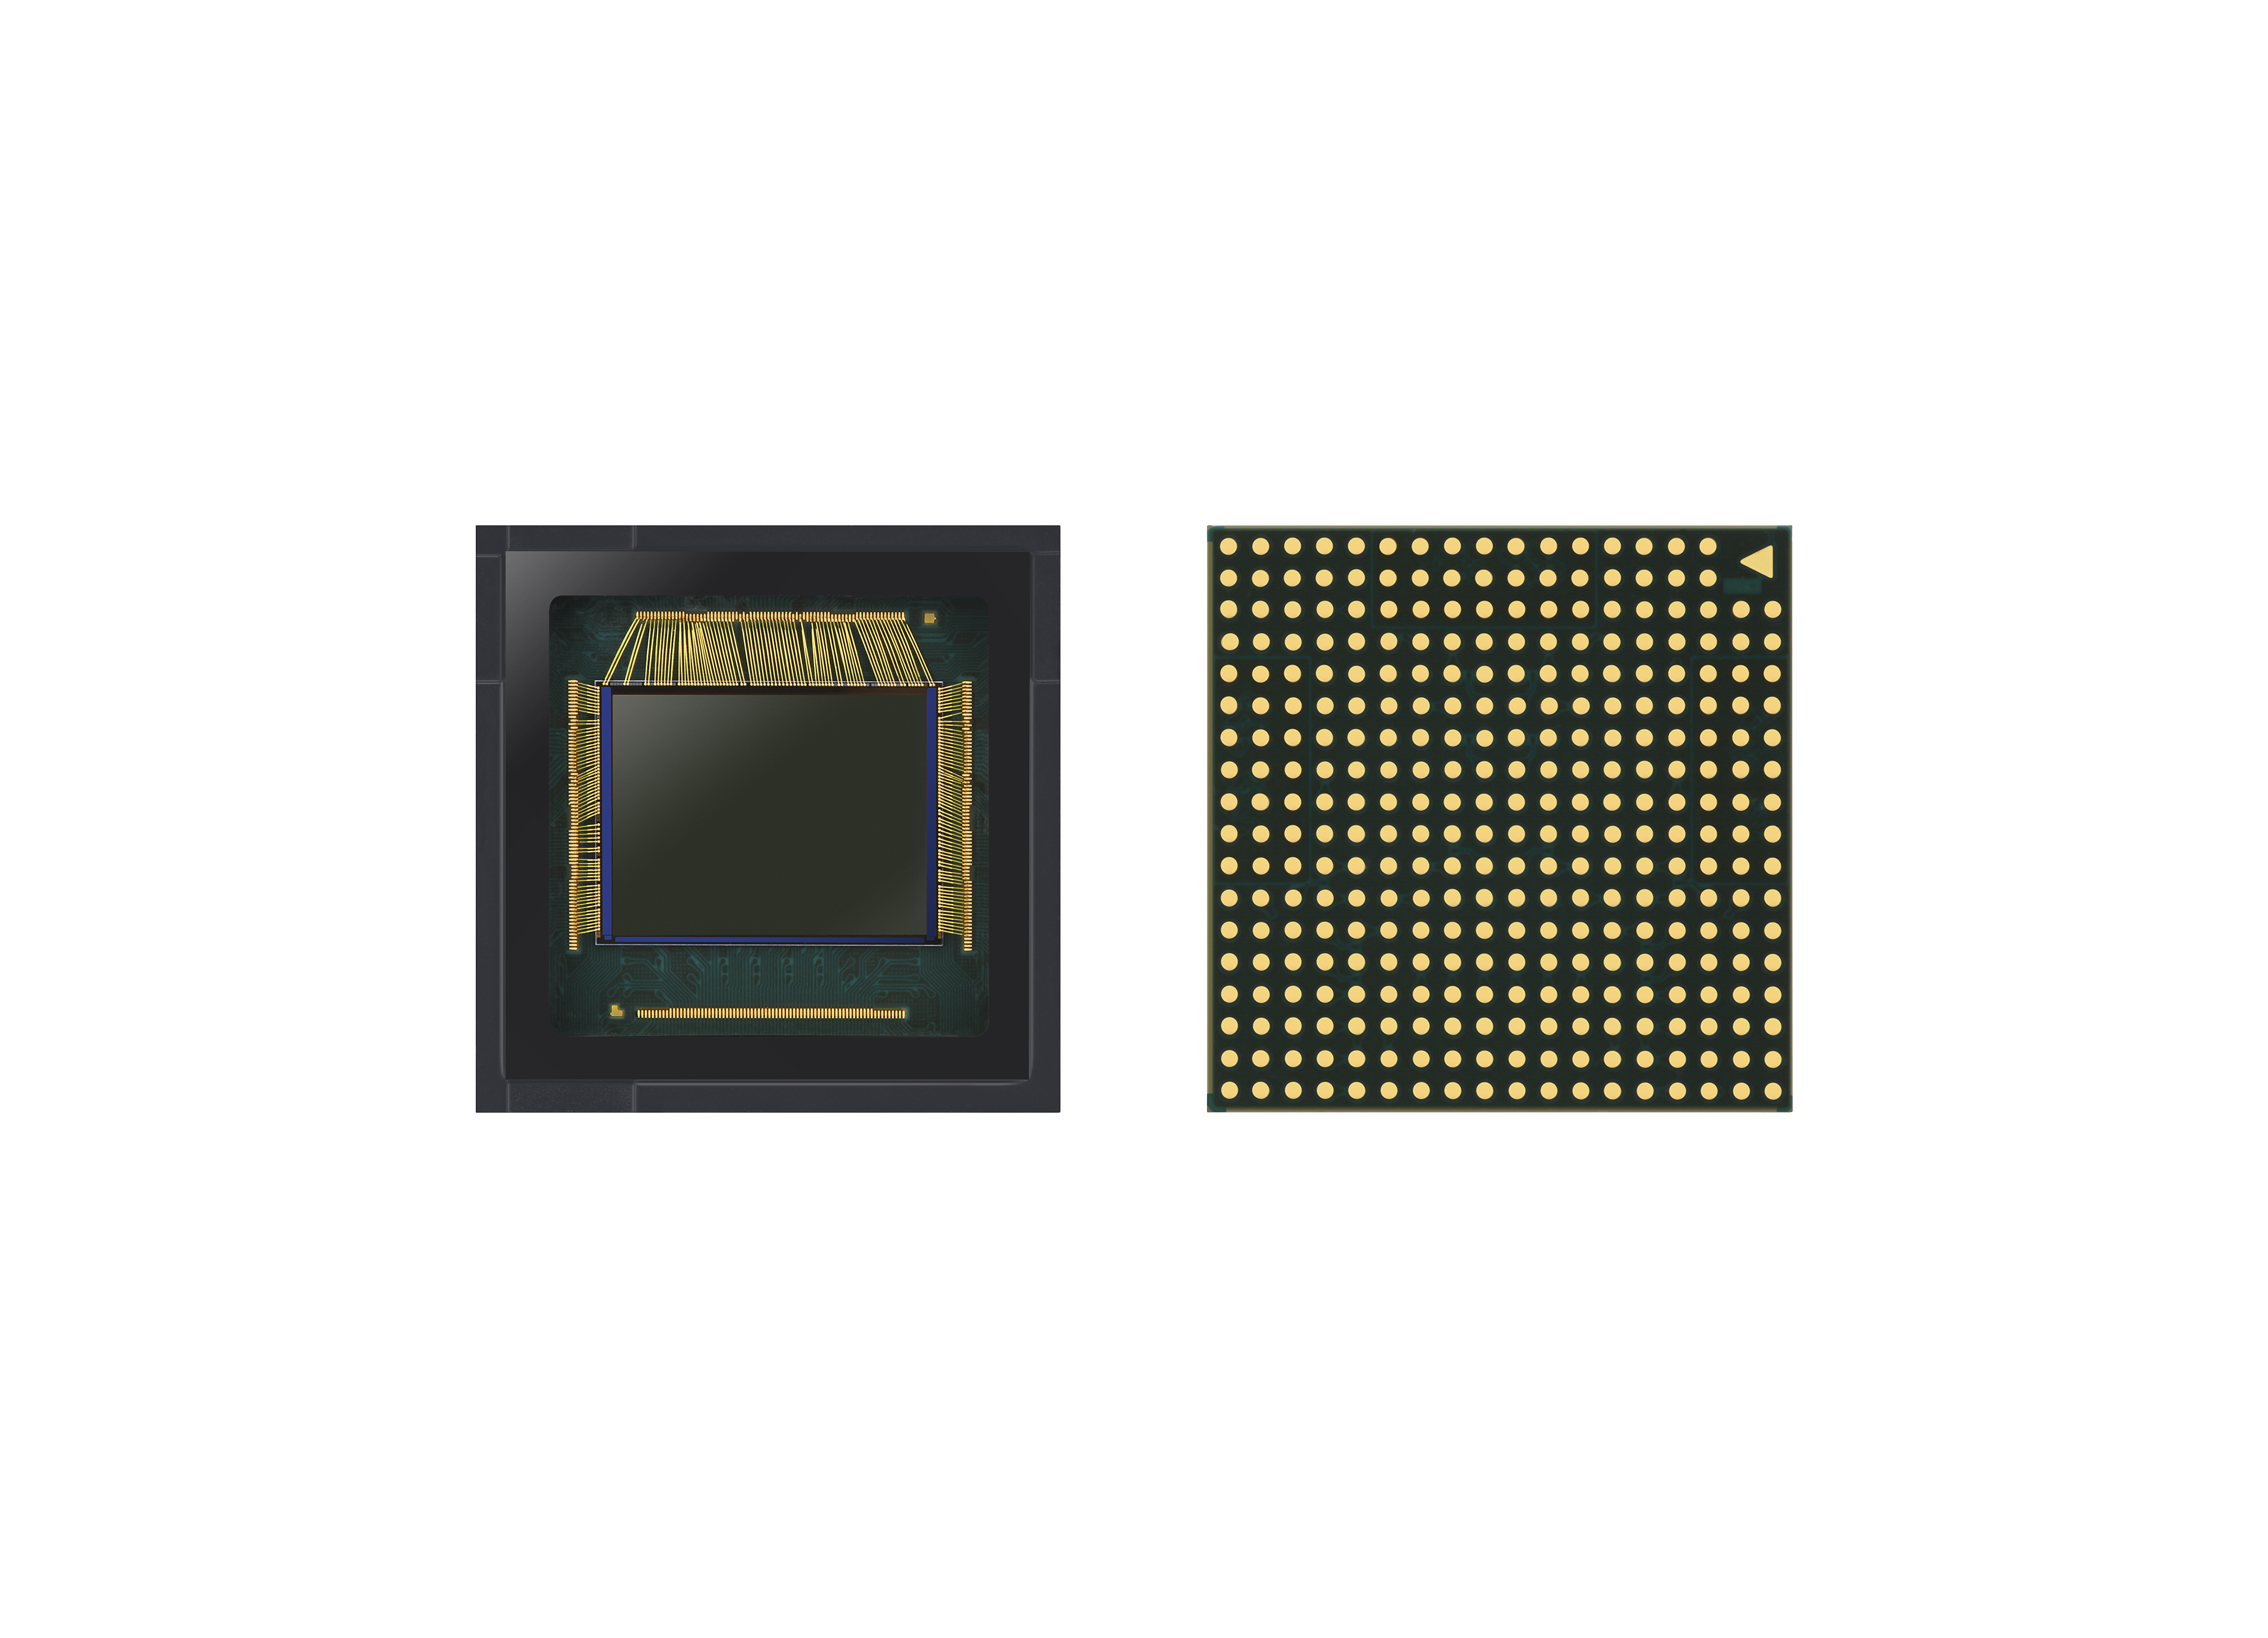 Samsung introduces 50MP sensor with dual pixel technology, 8K video recording support